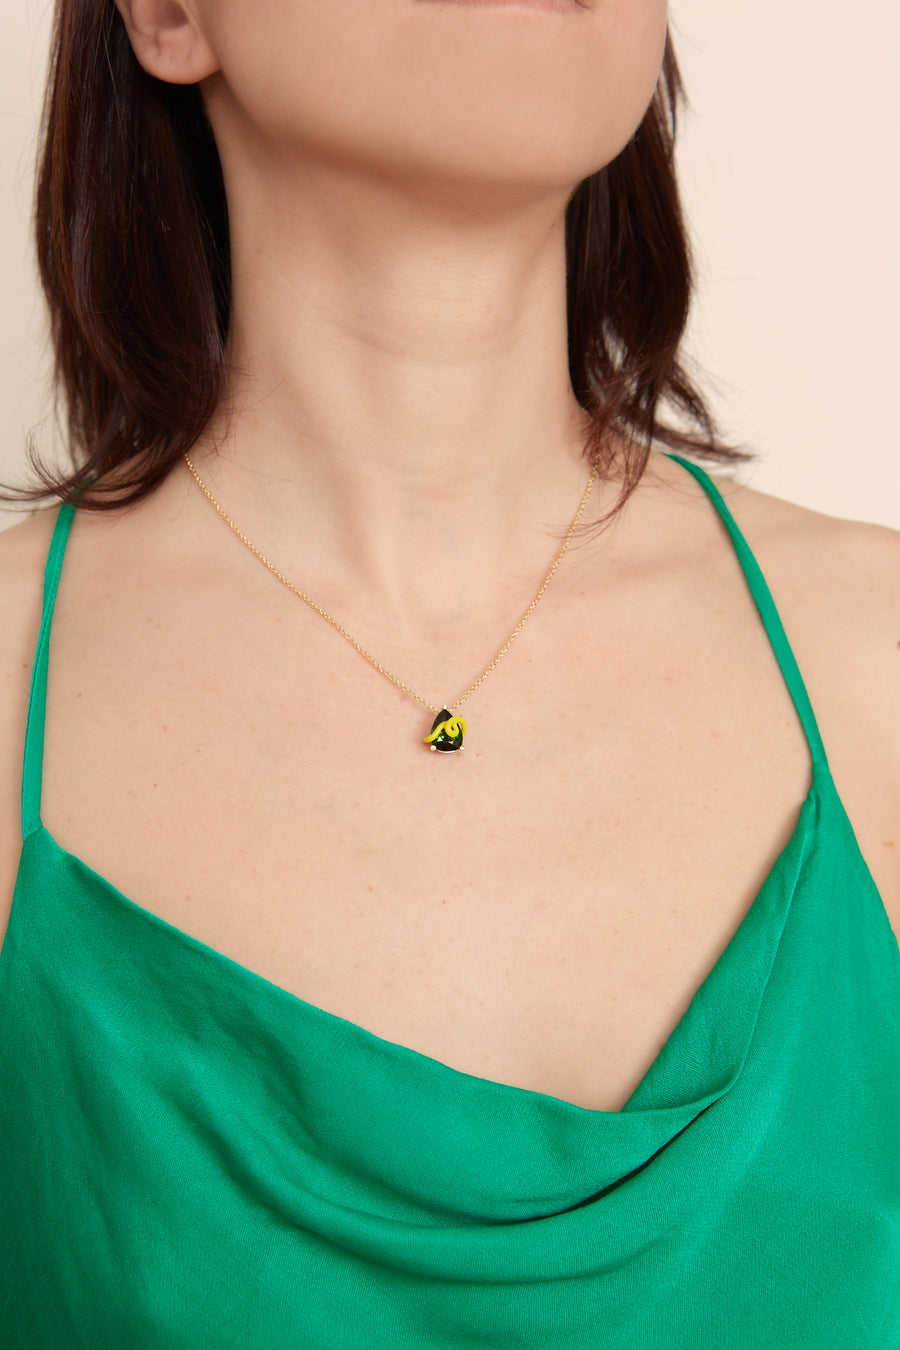 CHIHIRO NECKLACE IN SUNFLOWER WITH TOURMALINE